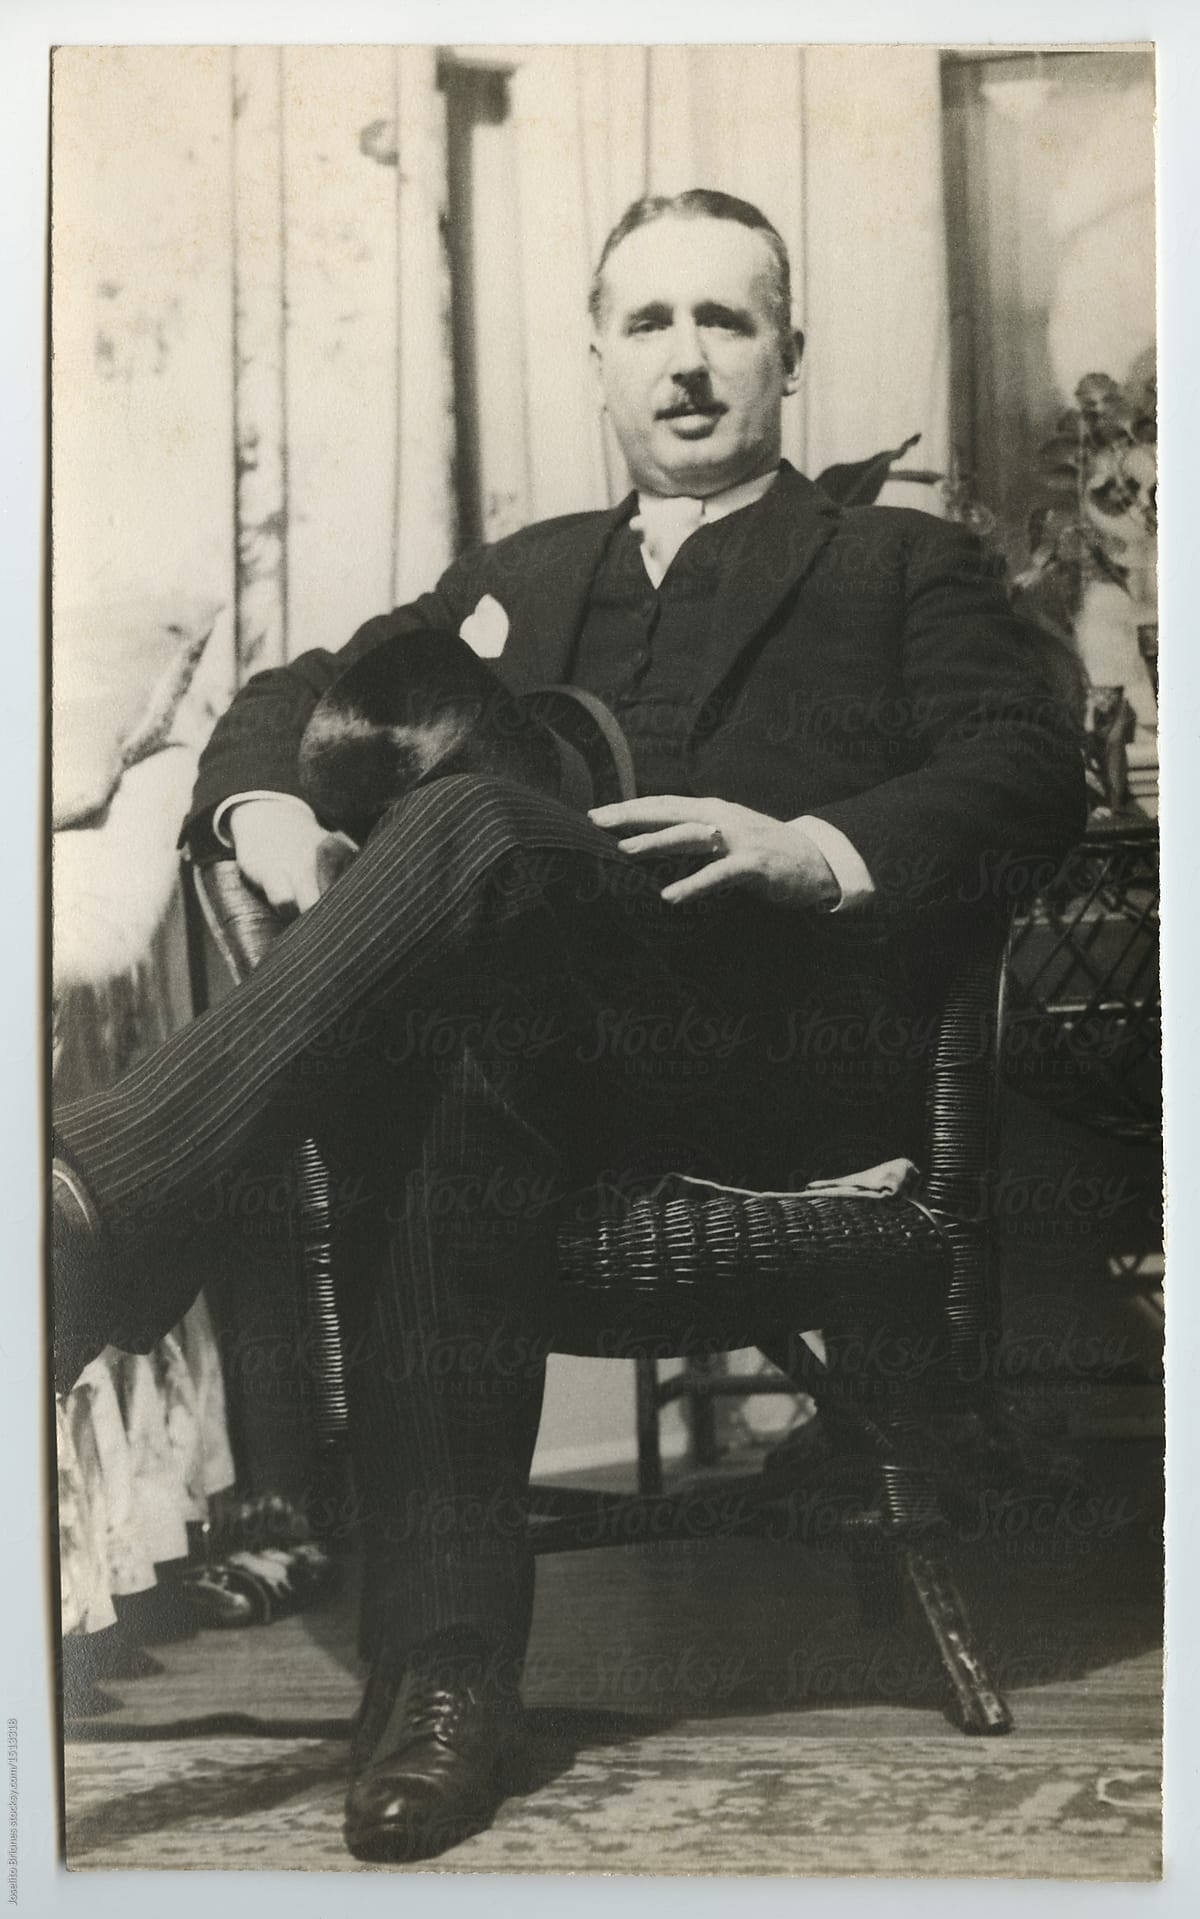 An elegantly dressed man sitting in a wicker chair and holding a